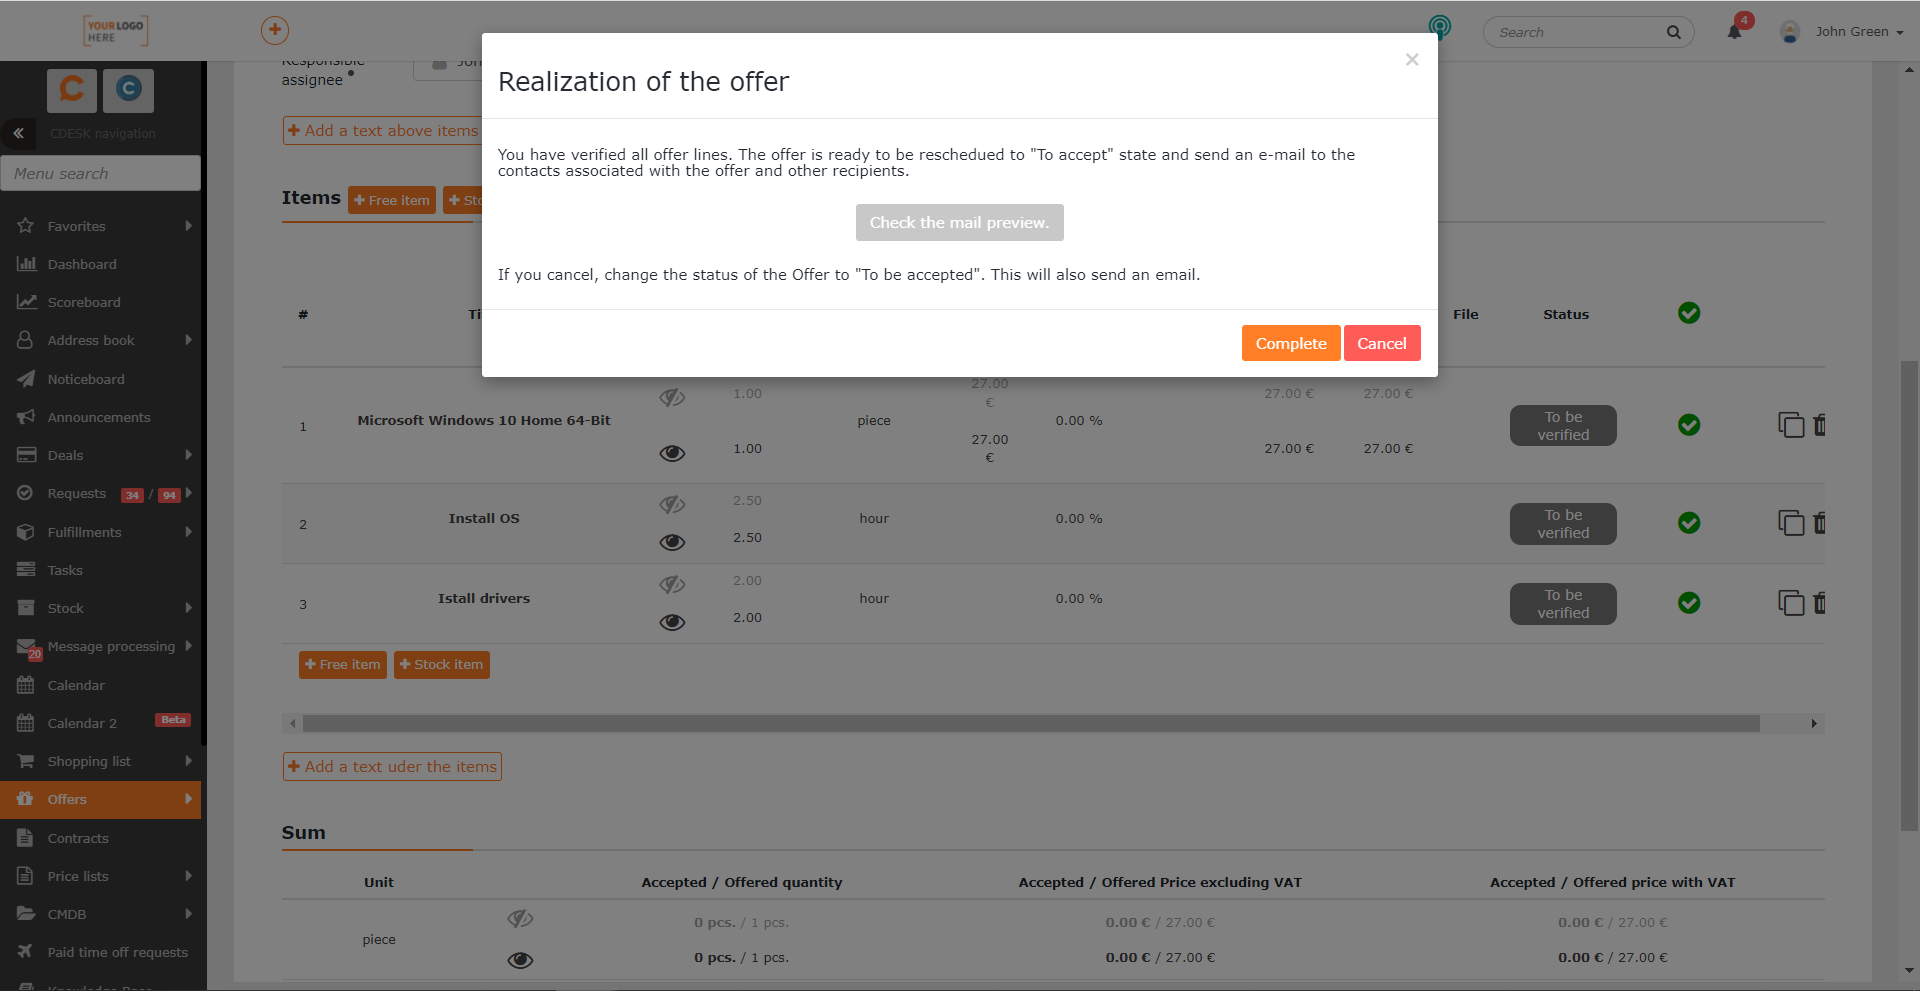 Modal window that appears after verifying the offer